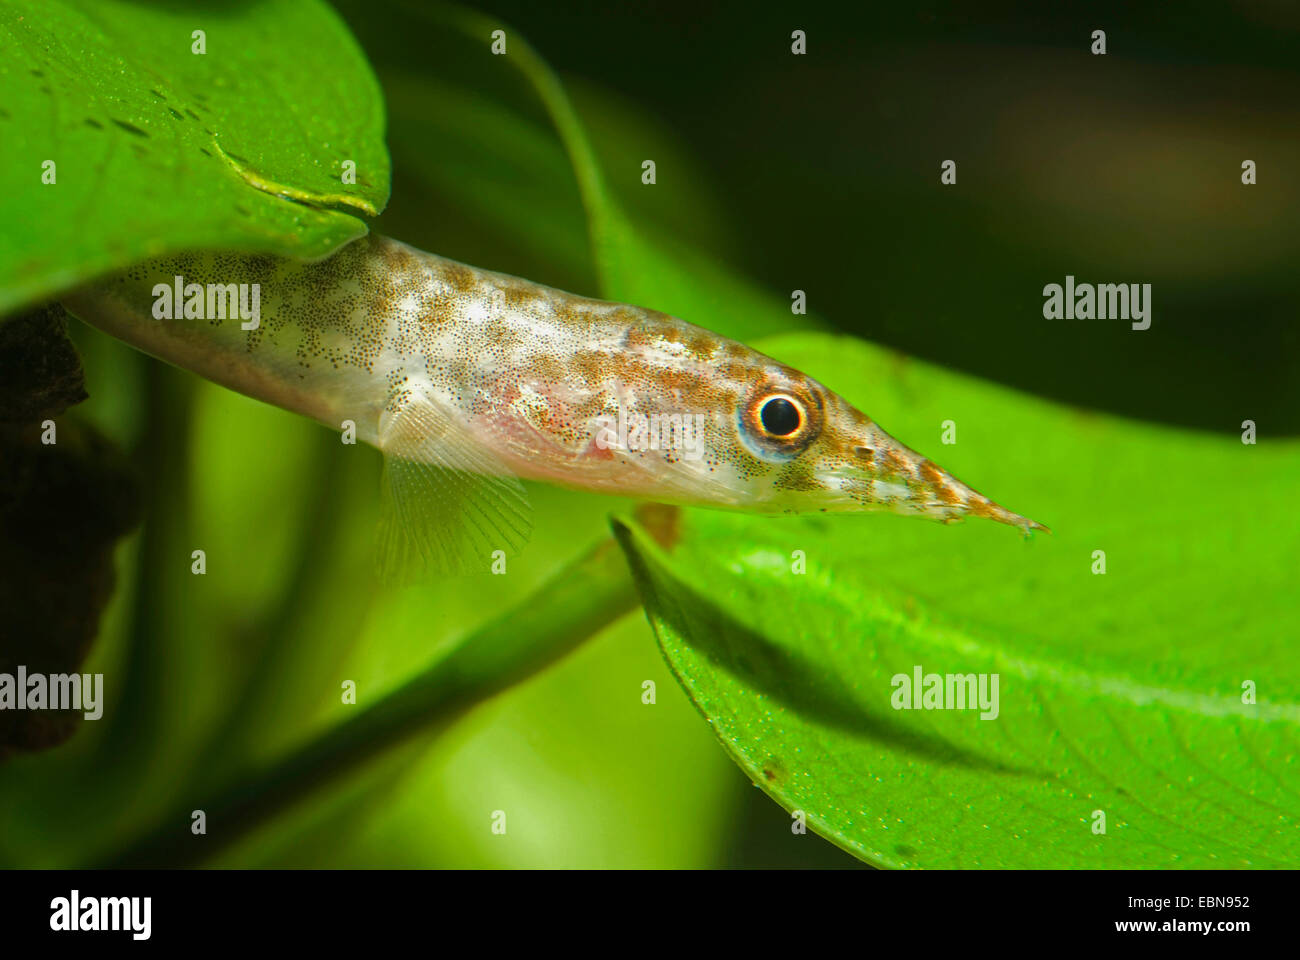 Indian green spiny eel; Spotted spiny eel (Macrognathus pancalus, Mastacembelus pancalus), portrait amongst water plants Stock Photo